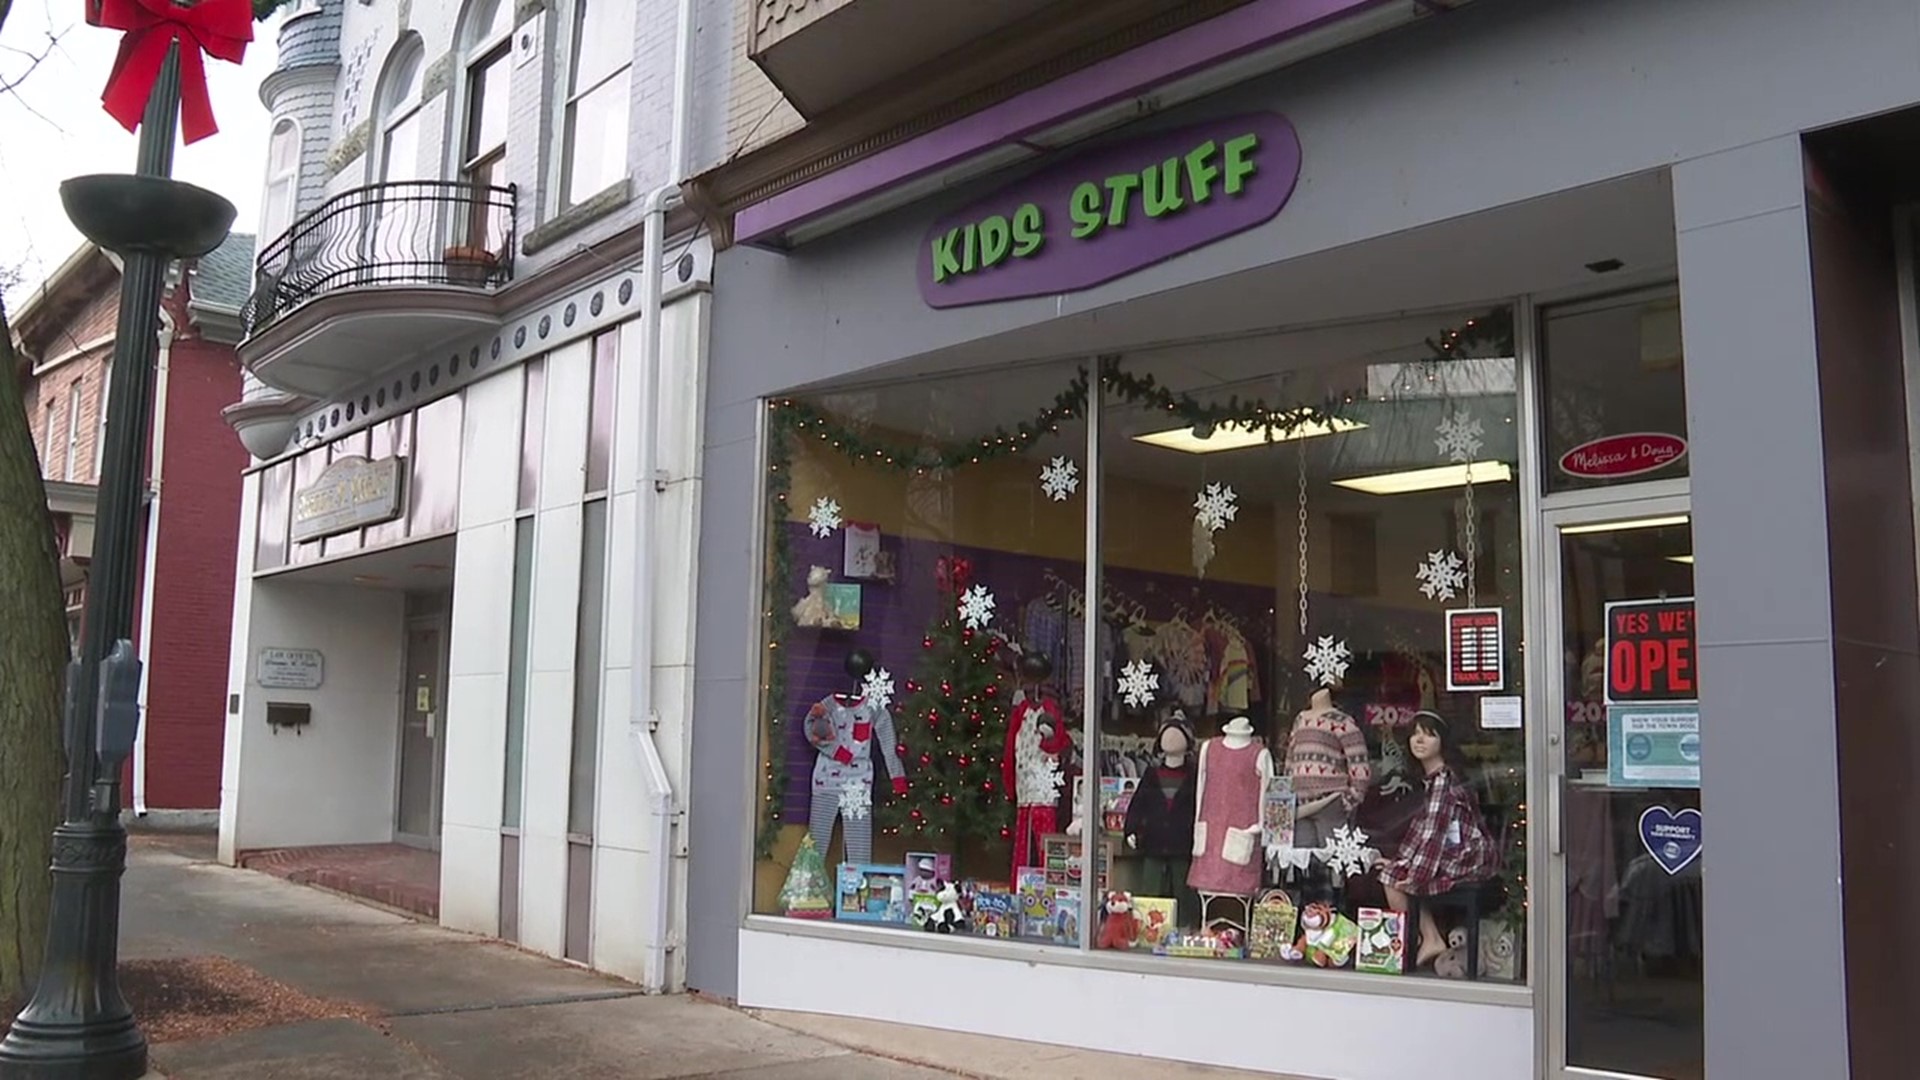 Buying holiday gifts locally could help sustain a small business through the pandemic.